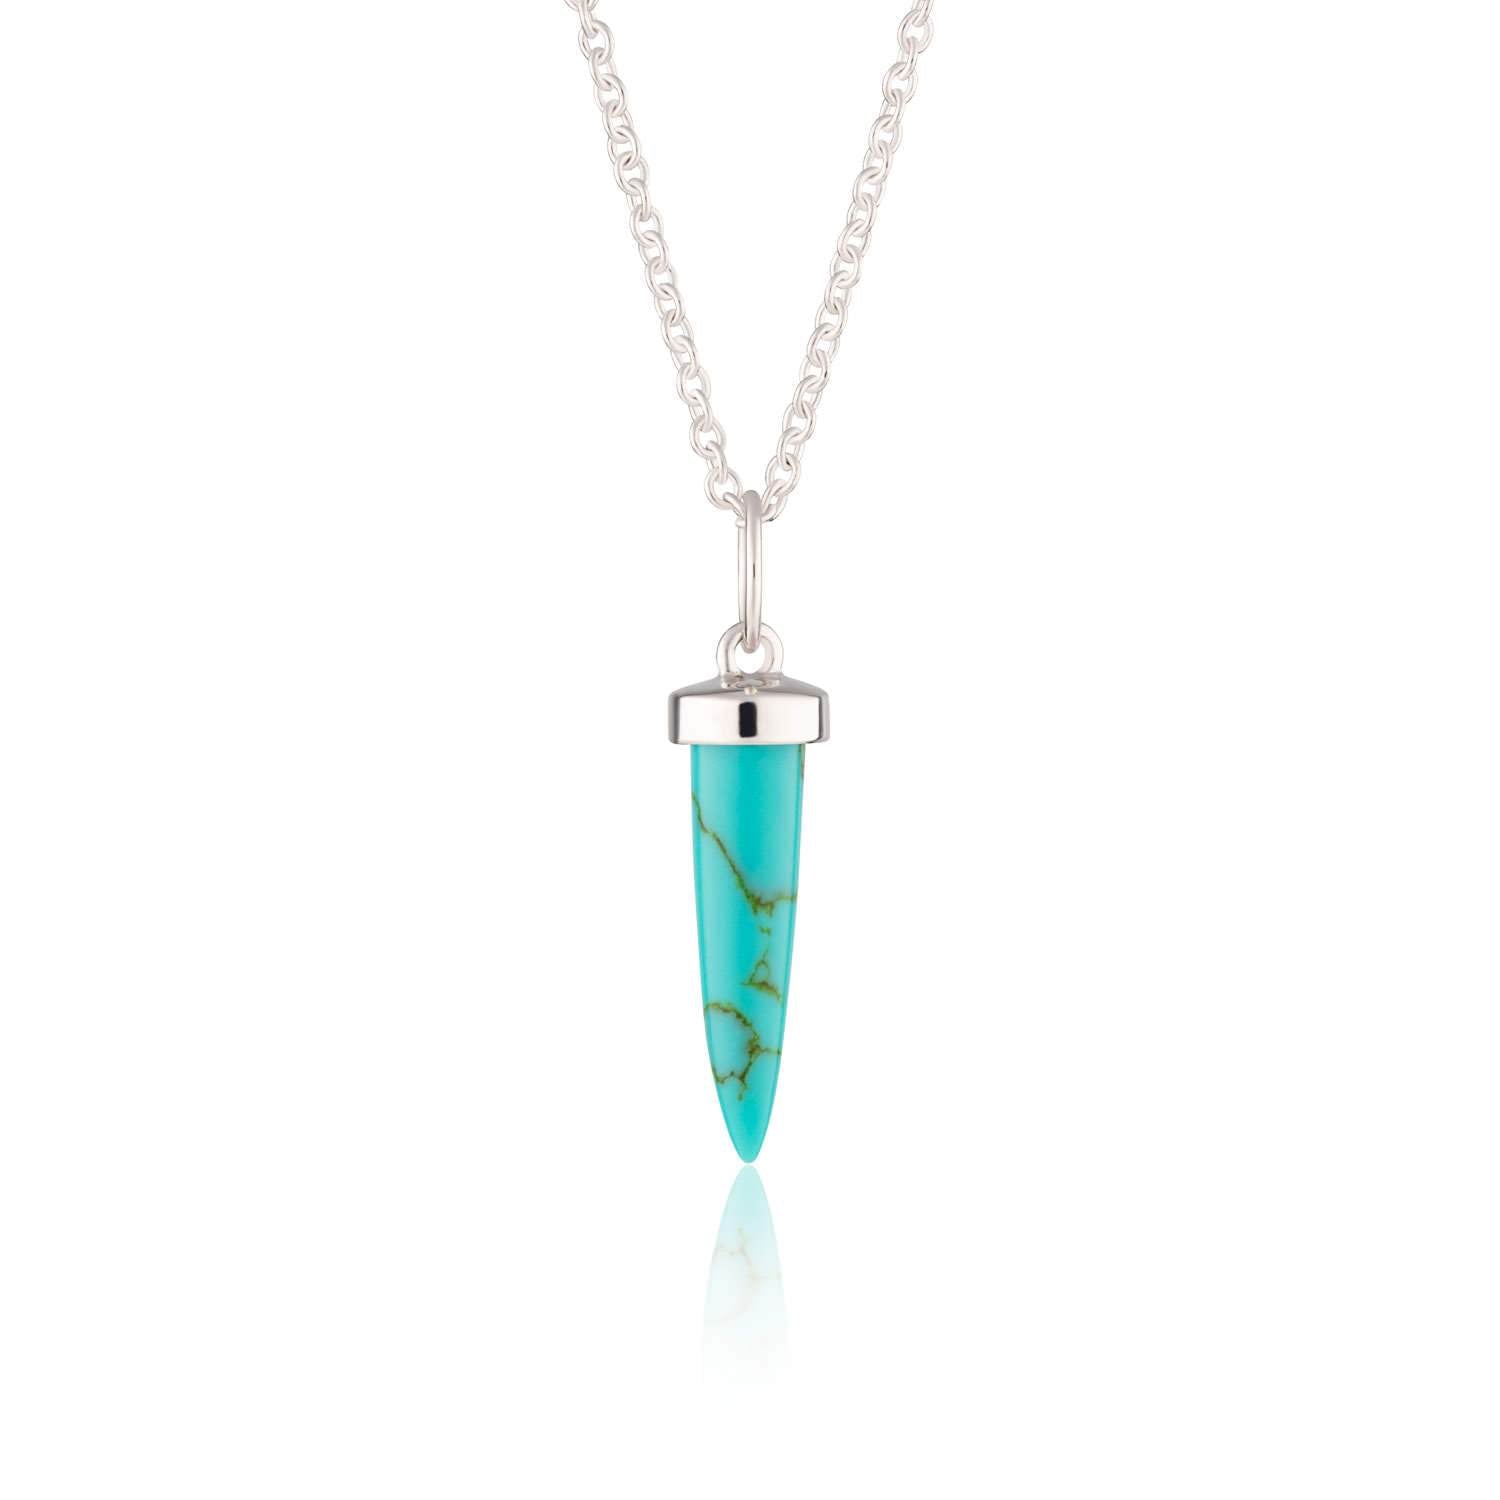 Silver Turquoise Spike Necklace with Slider Clasp - by Scream Pretty